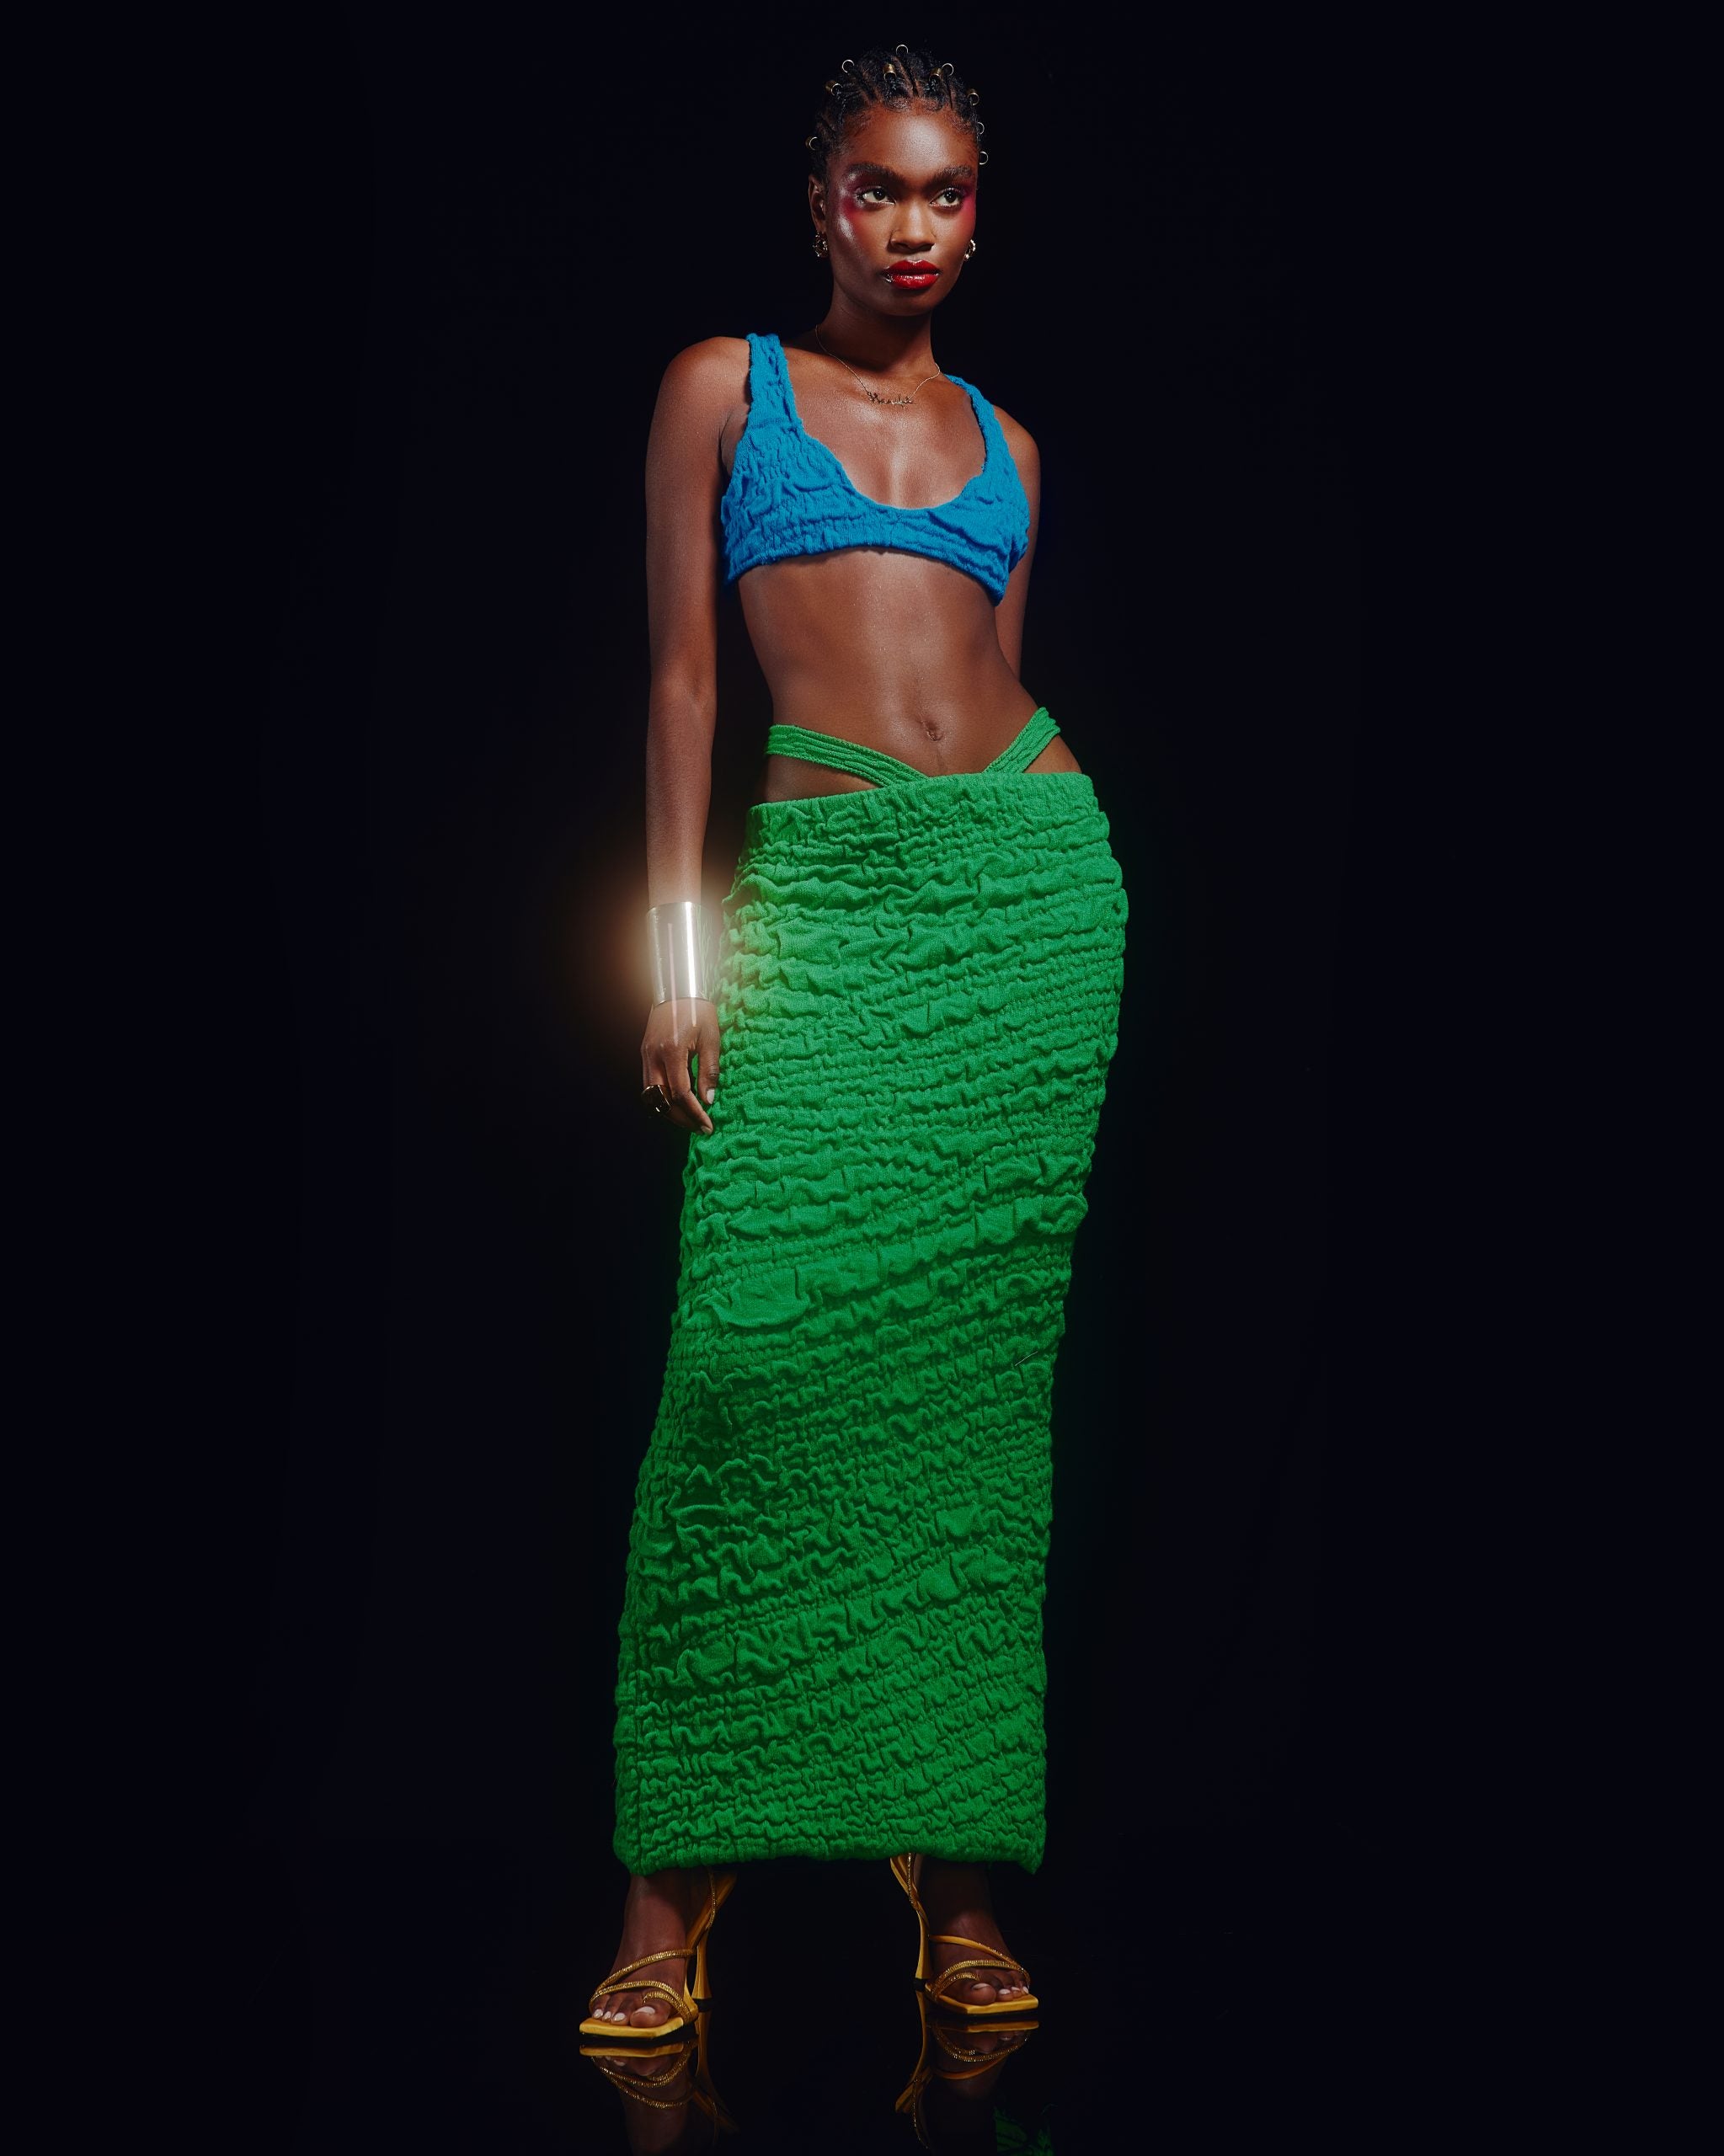 Anifa Mvuemba Wanted To Bring ‘Real People’ To Her Latest Digital SS2022 Collection Runway Show